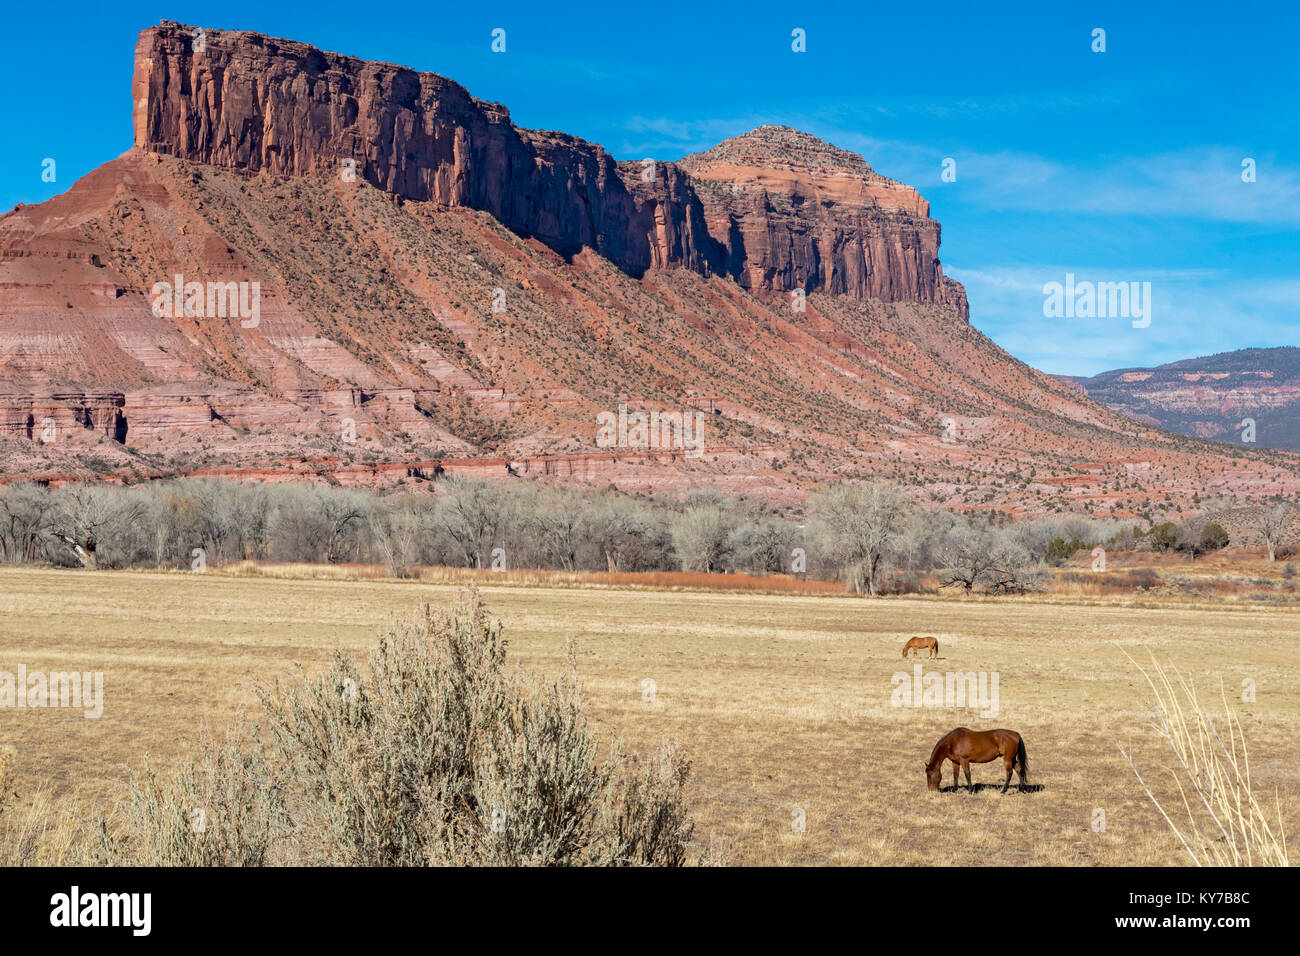 Gateway, Colorado - Horses graze below the Palisade in Colorado's canyon country along the Unaweep/Tabeguache Scenic Byway (State Highway 141). Stock Photo